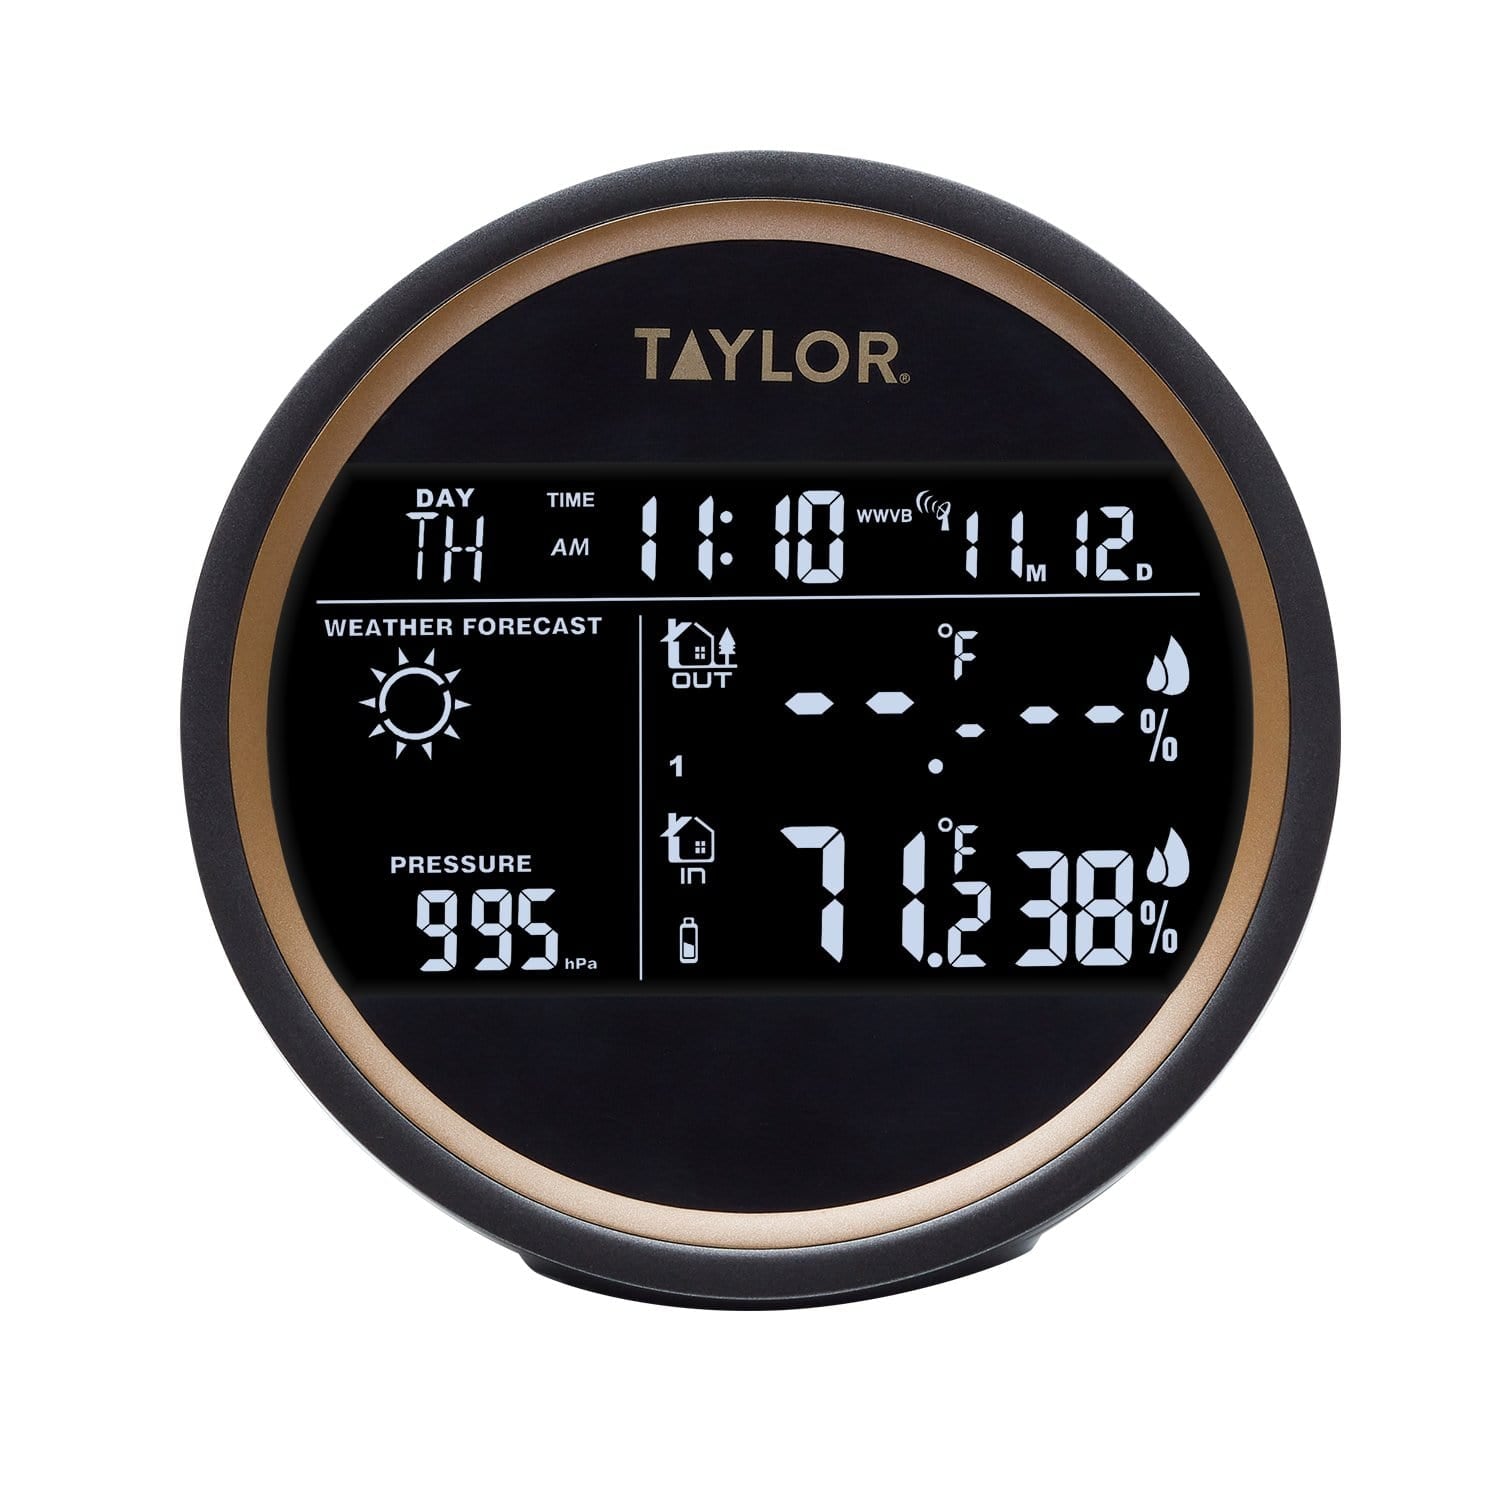 Taylor Digital Deluxe Color Weather Forecaster 1736